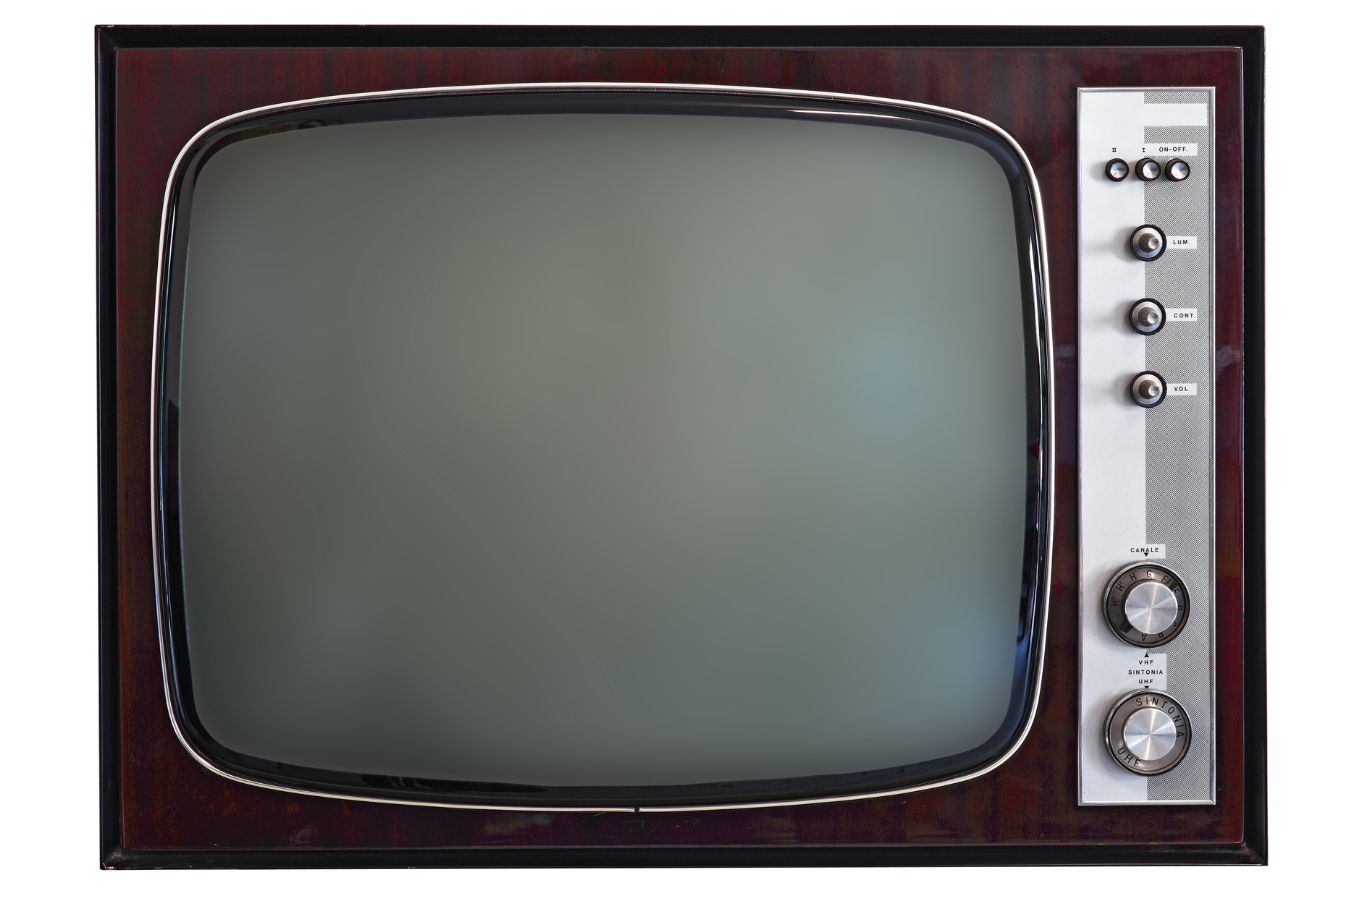 Vintage TV with blank screen